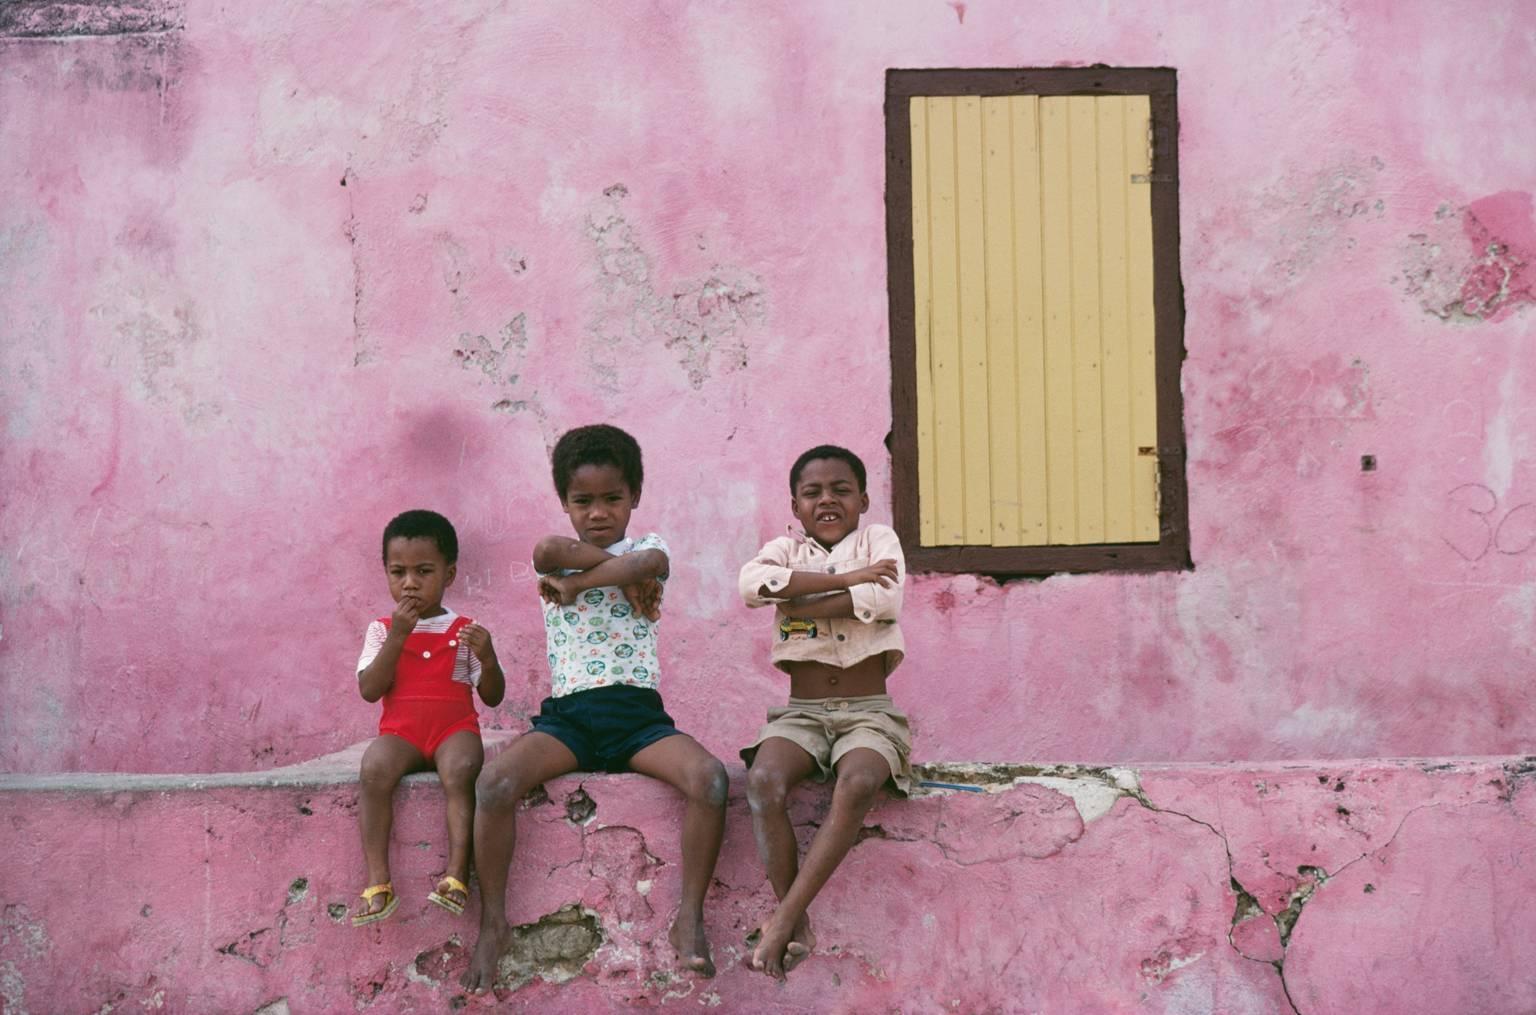 'Curacao Children' by Slim Aarons

Three local children sitting on a low predominantly pink coloured wall with a yellow shuttered window behind them, with cheeky smiles and expressions - Curacao, Netherlands Antilles, January 1979. 

A relatively